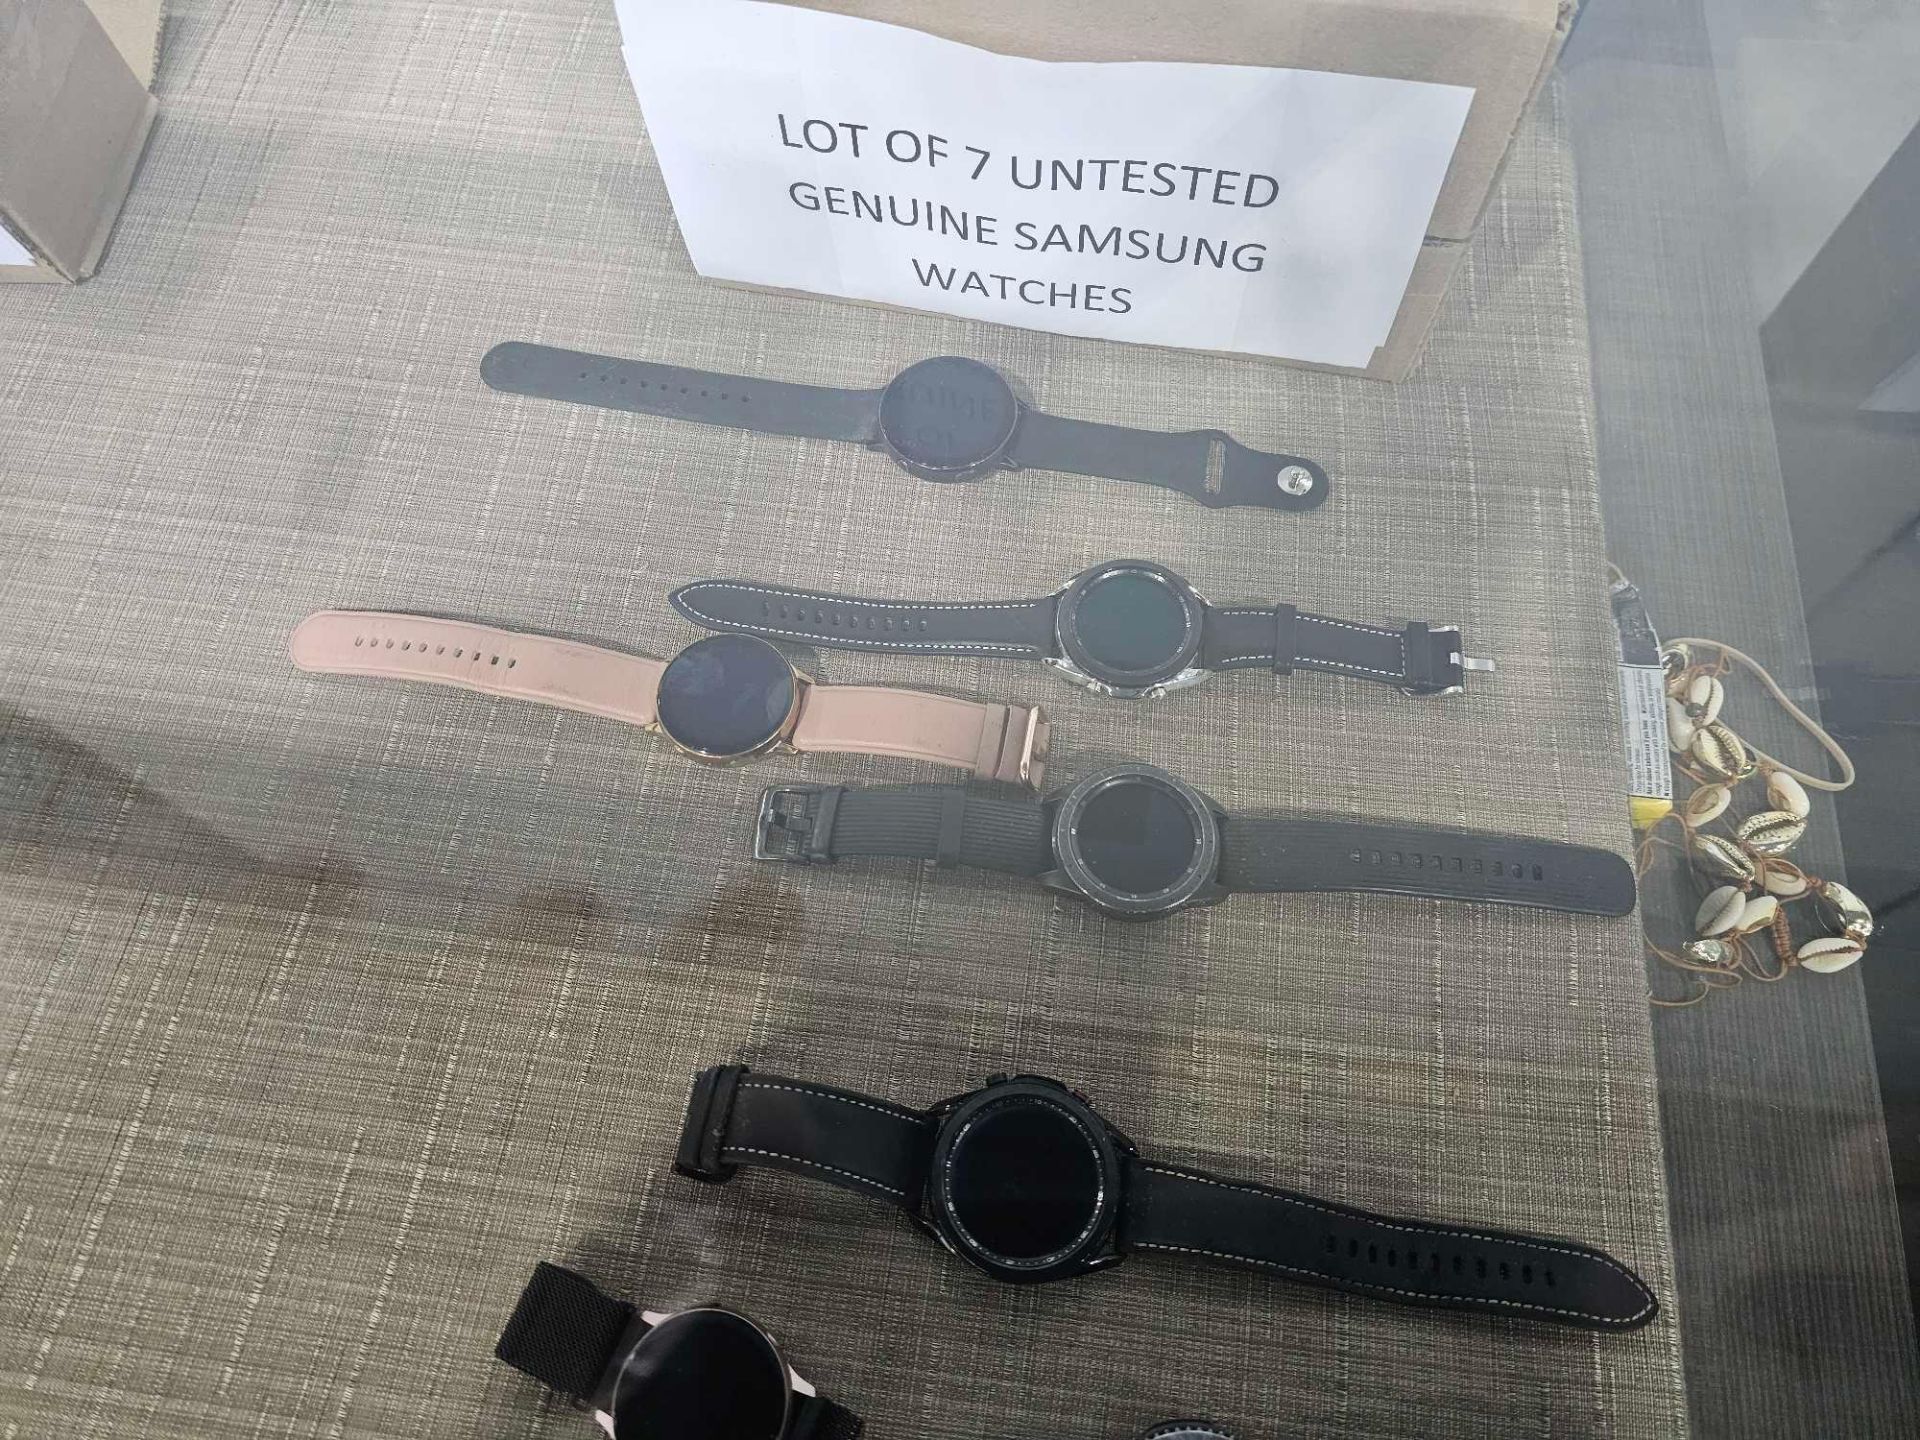 7 Samsung watches, not tested - Image 3 of 3